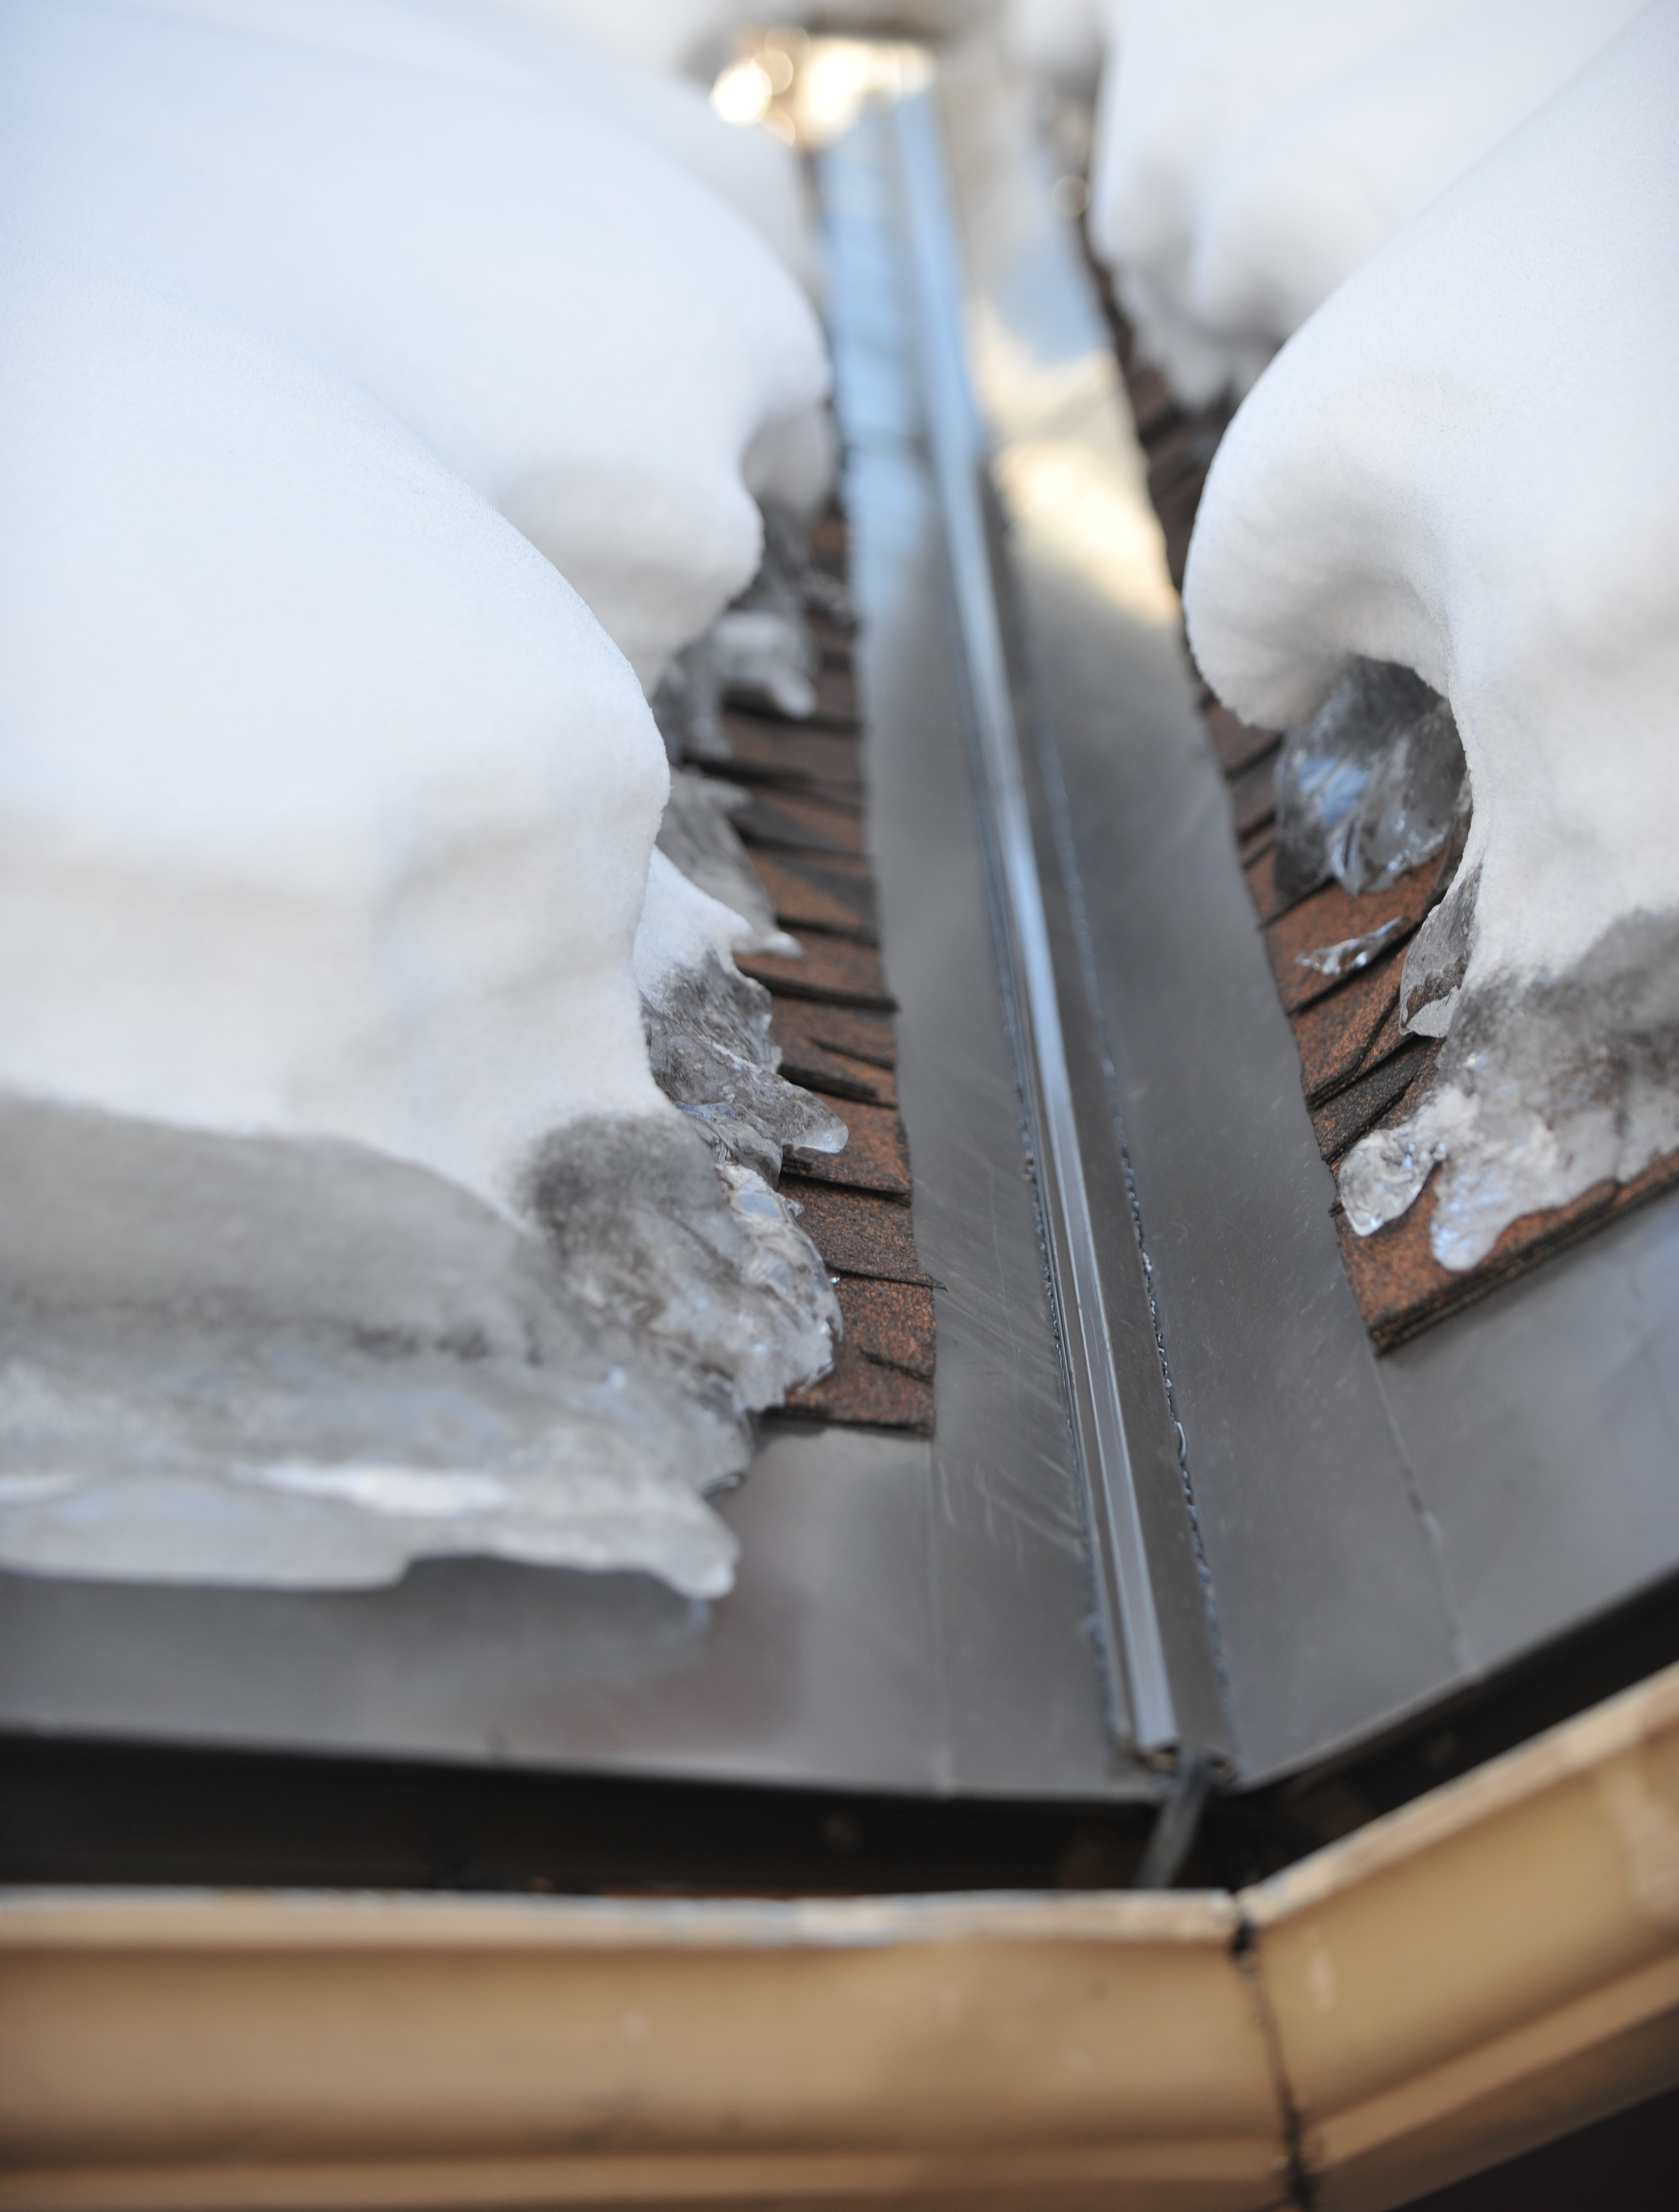 Effective Ice Dam Prevention Systems for Asphalt Roofs